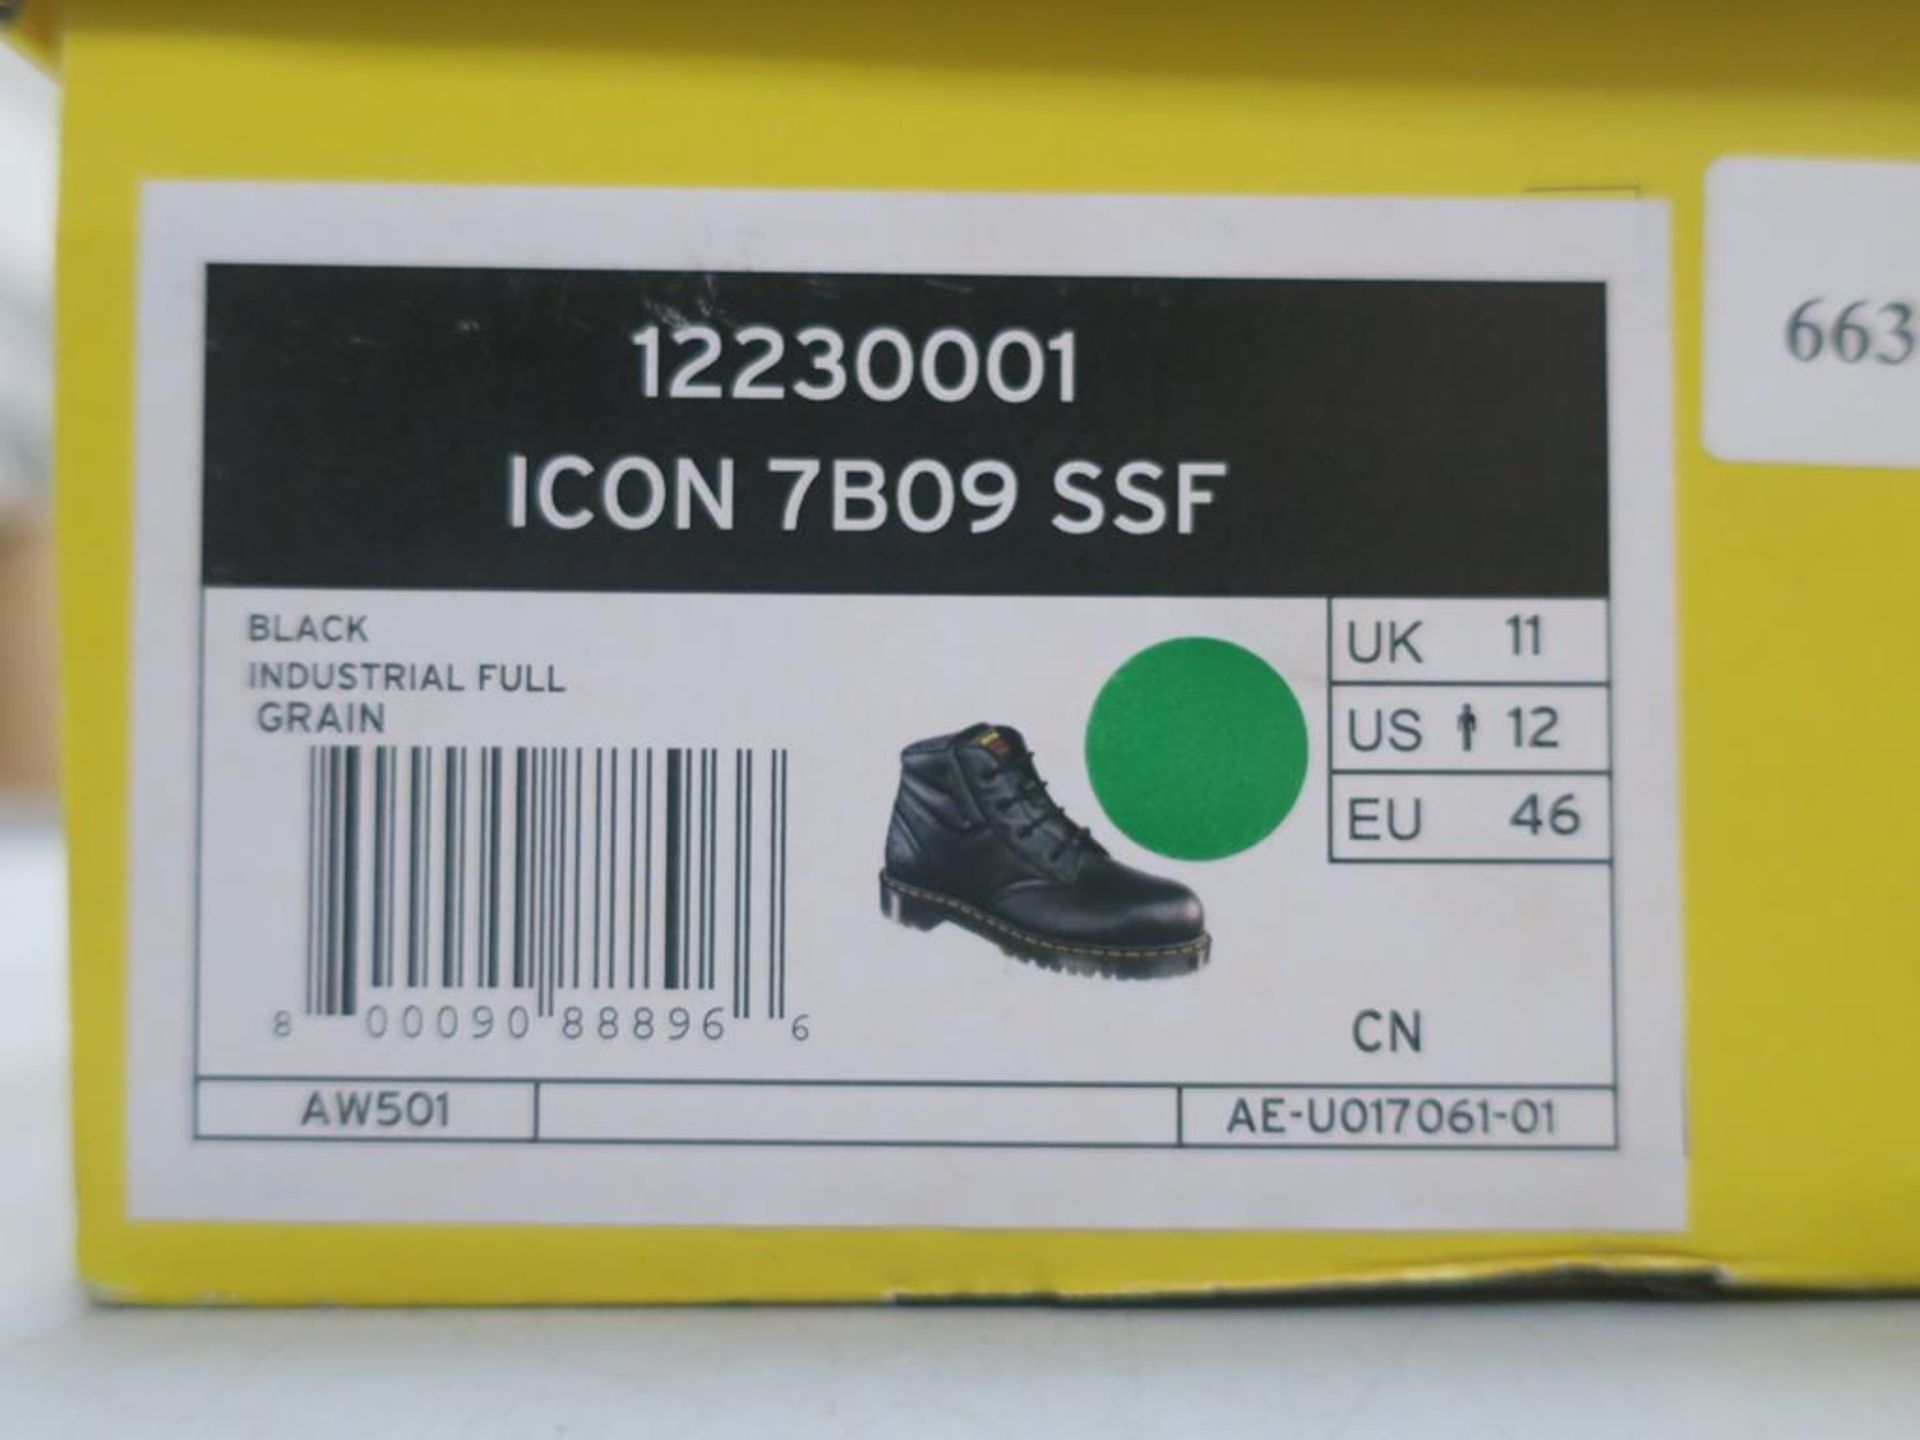 * A pair of New/Boxed Dr Martens Boots, Icon 7B09 SSF, 12230001, Industrial Full Grain, Black, UK - Image 3 of 3